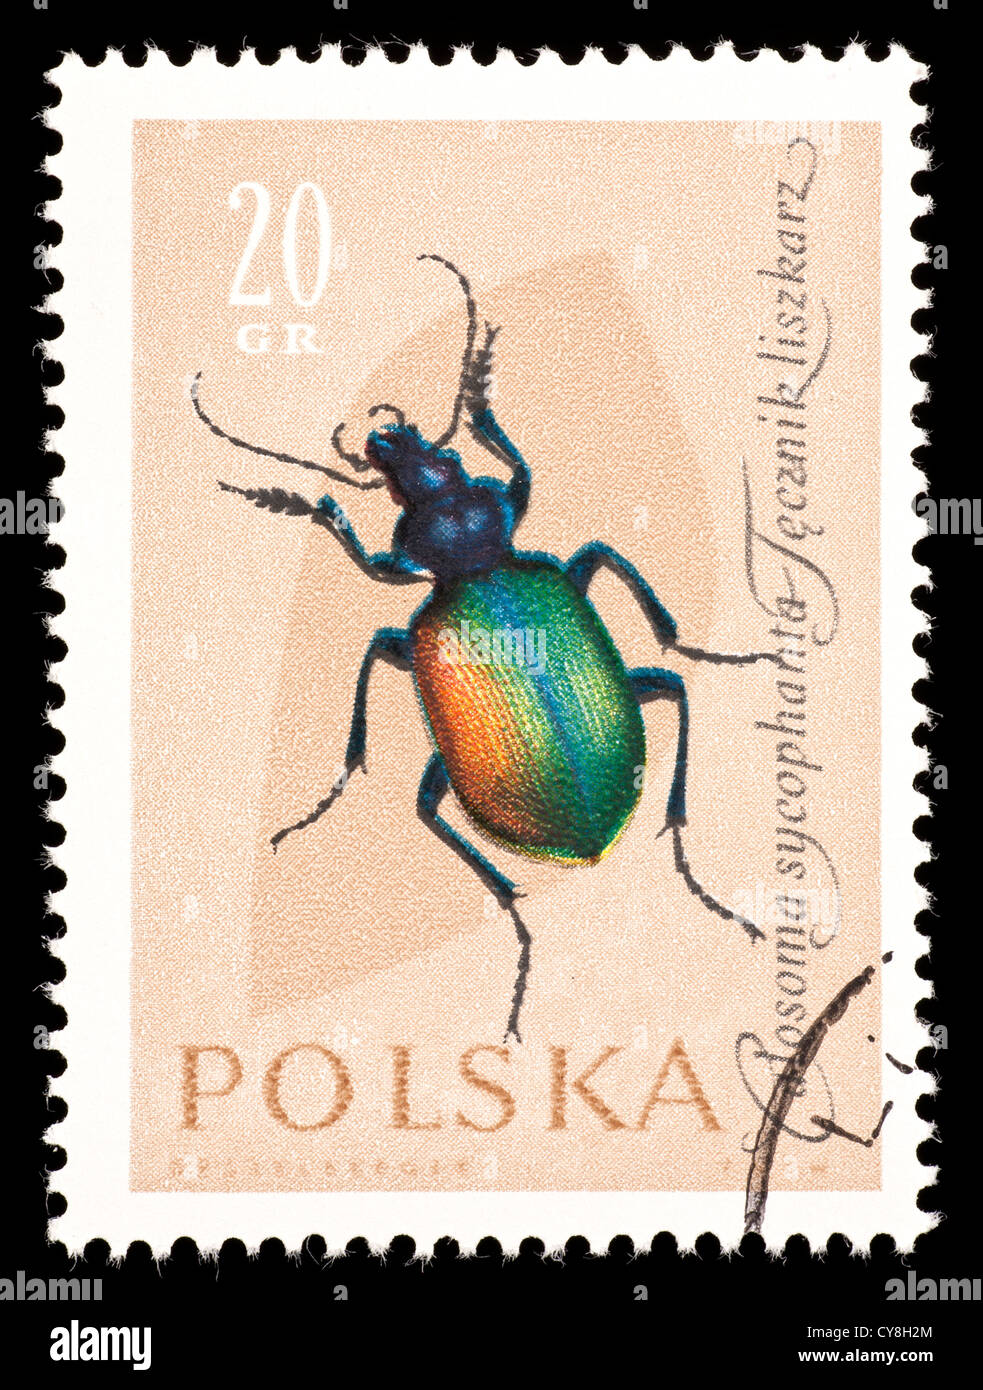 Postage stamp from Poland depicting a forest caterpillar hunter beetle (Calosoma sycophanta) Stock Photo